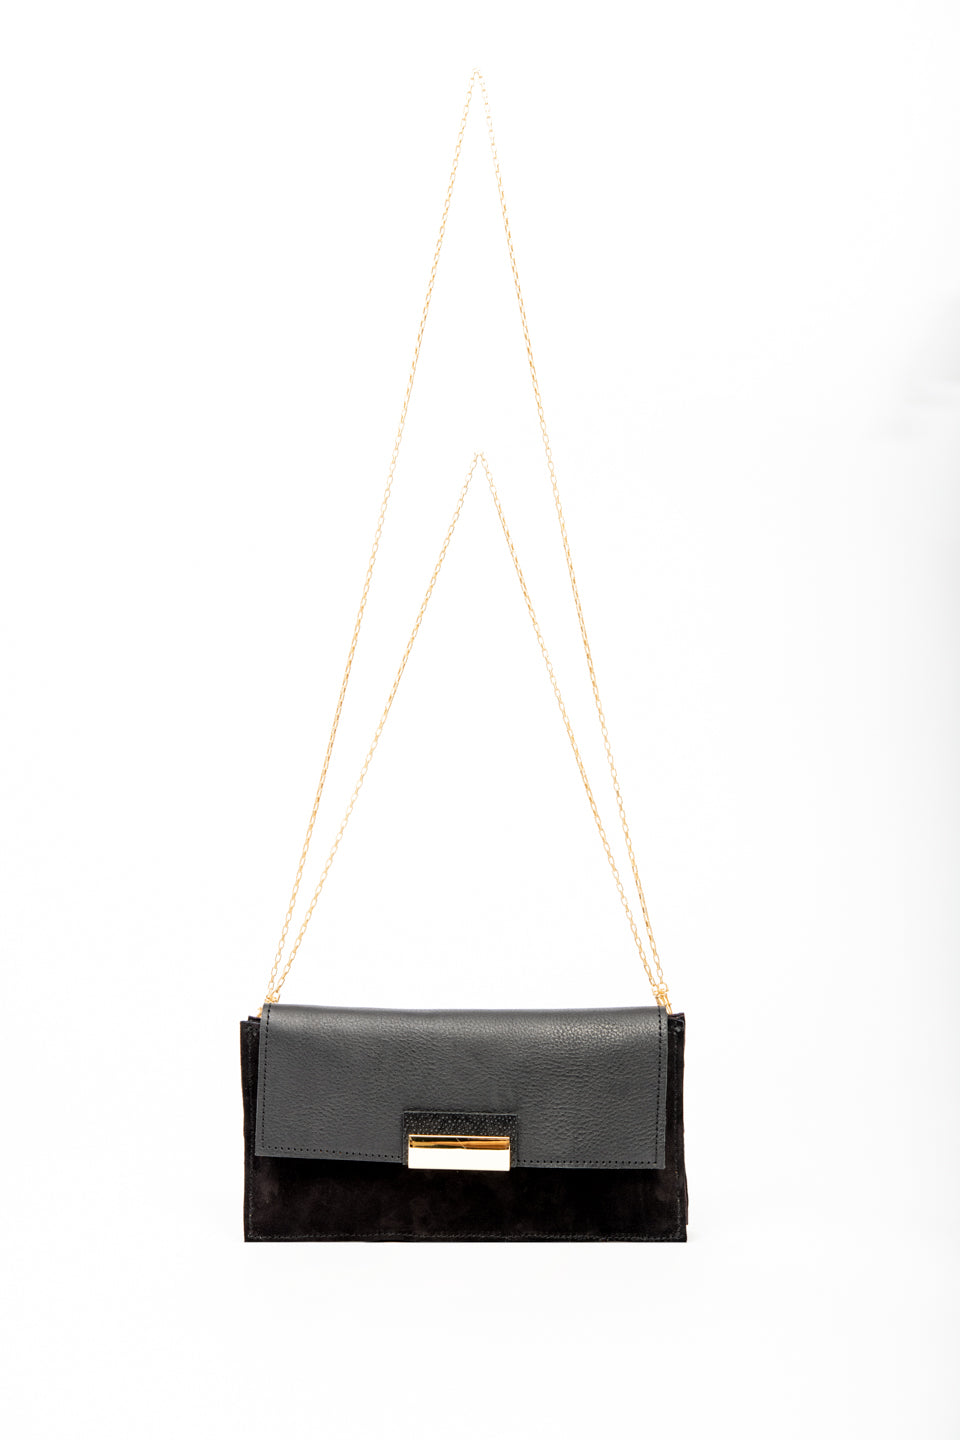 Leather evening bag RETTANGOLO model from the Variable Geometry collection by VEINAGE, handmade in Montreal Canada